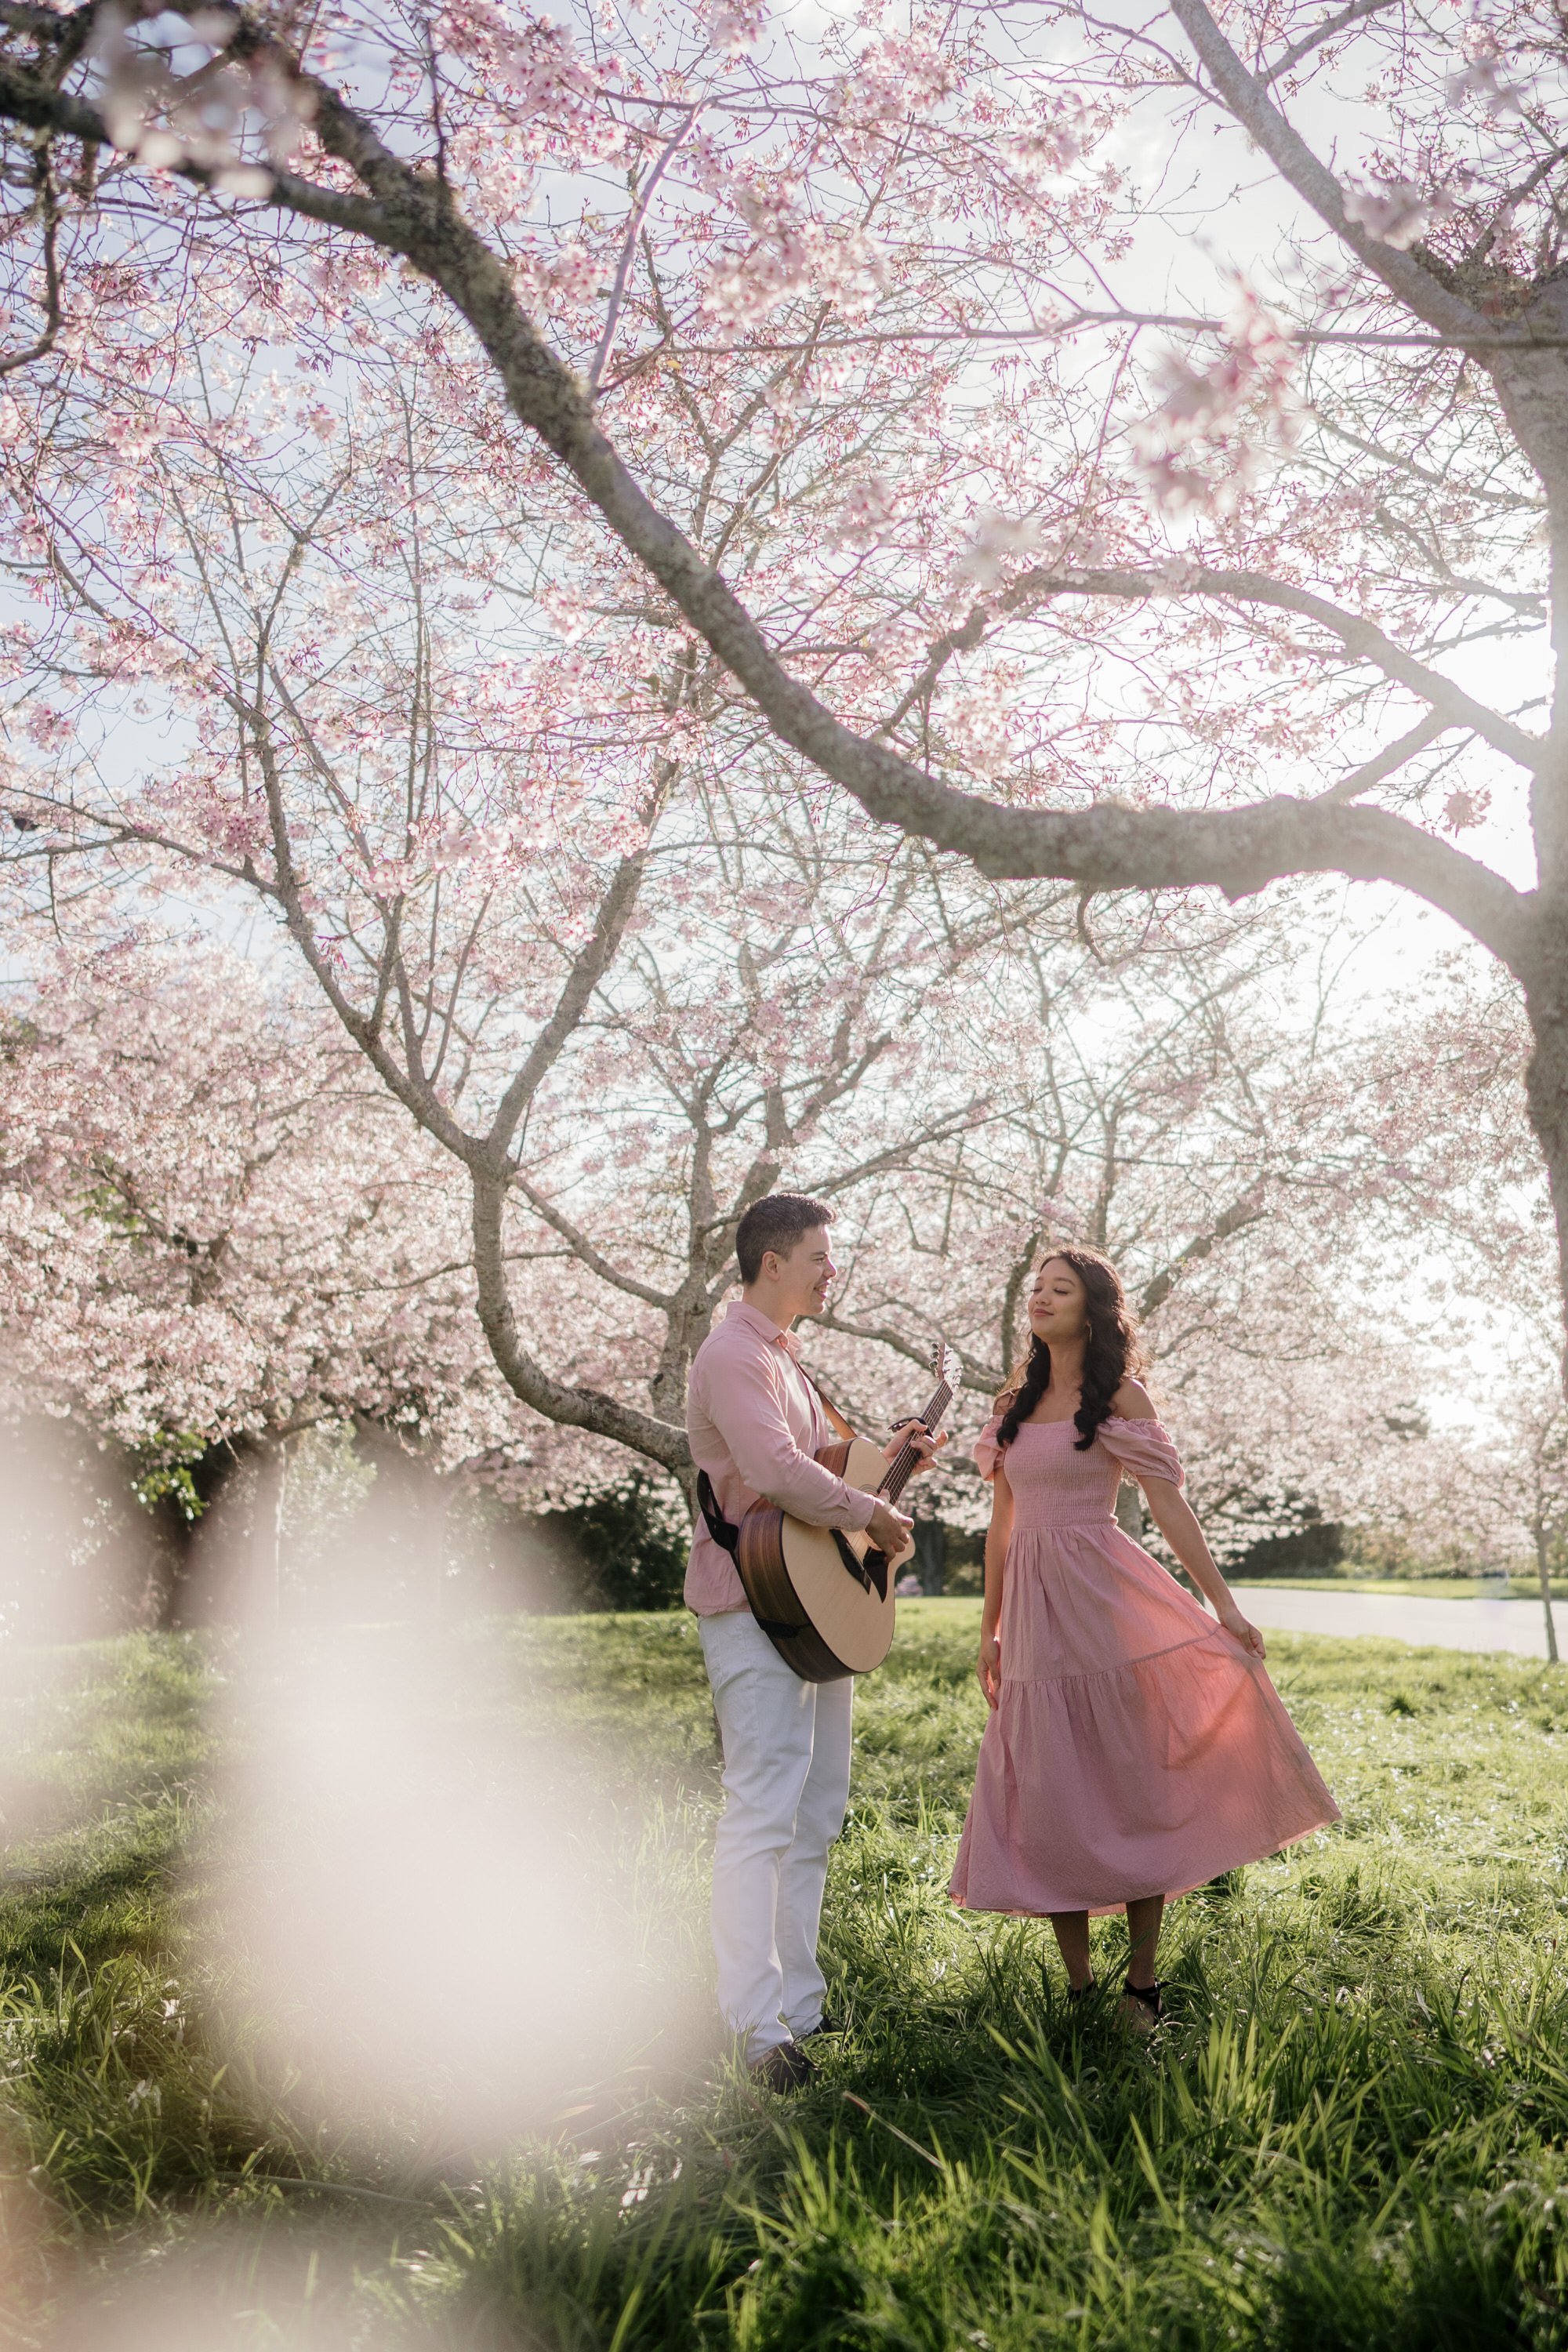 nate-and-thea-singers-duo-2023-top-auckland-wedding-phtographer-photography-videography-film-new-zealand-NZ-best-band-cherry-blossom-botanical-garden-engagement-elopement-dear-white-productions (12).jpg